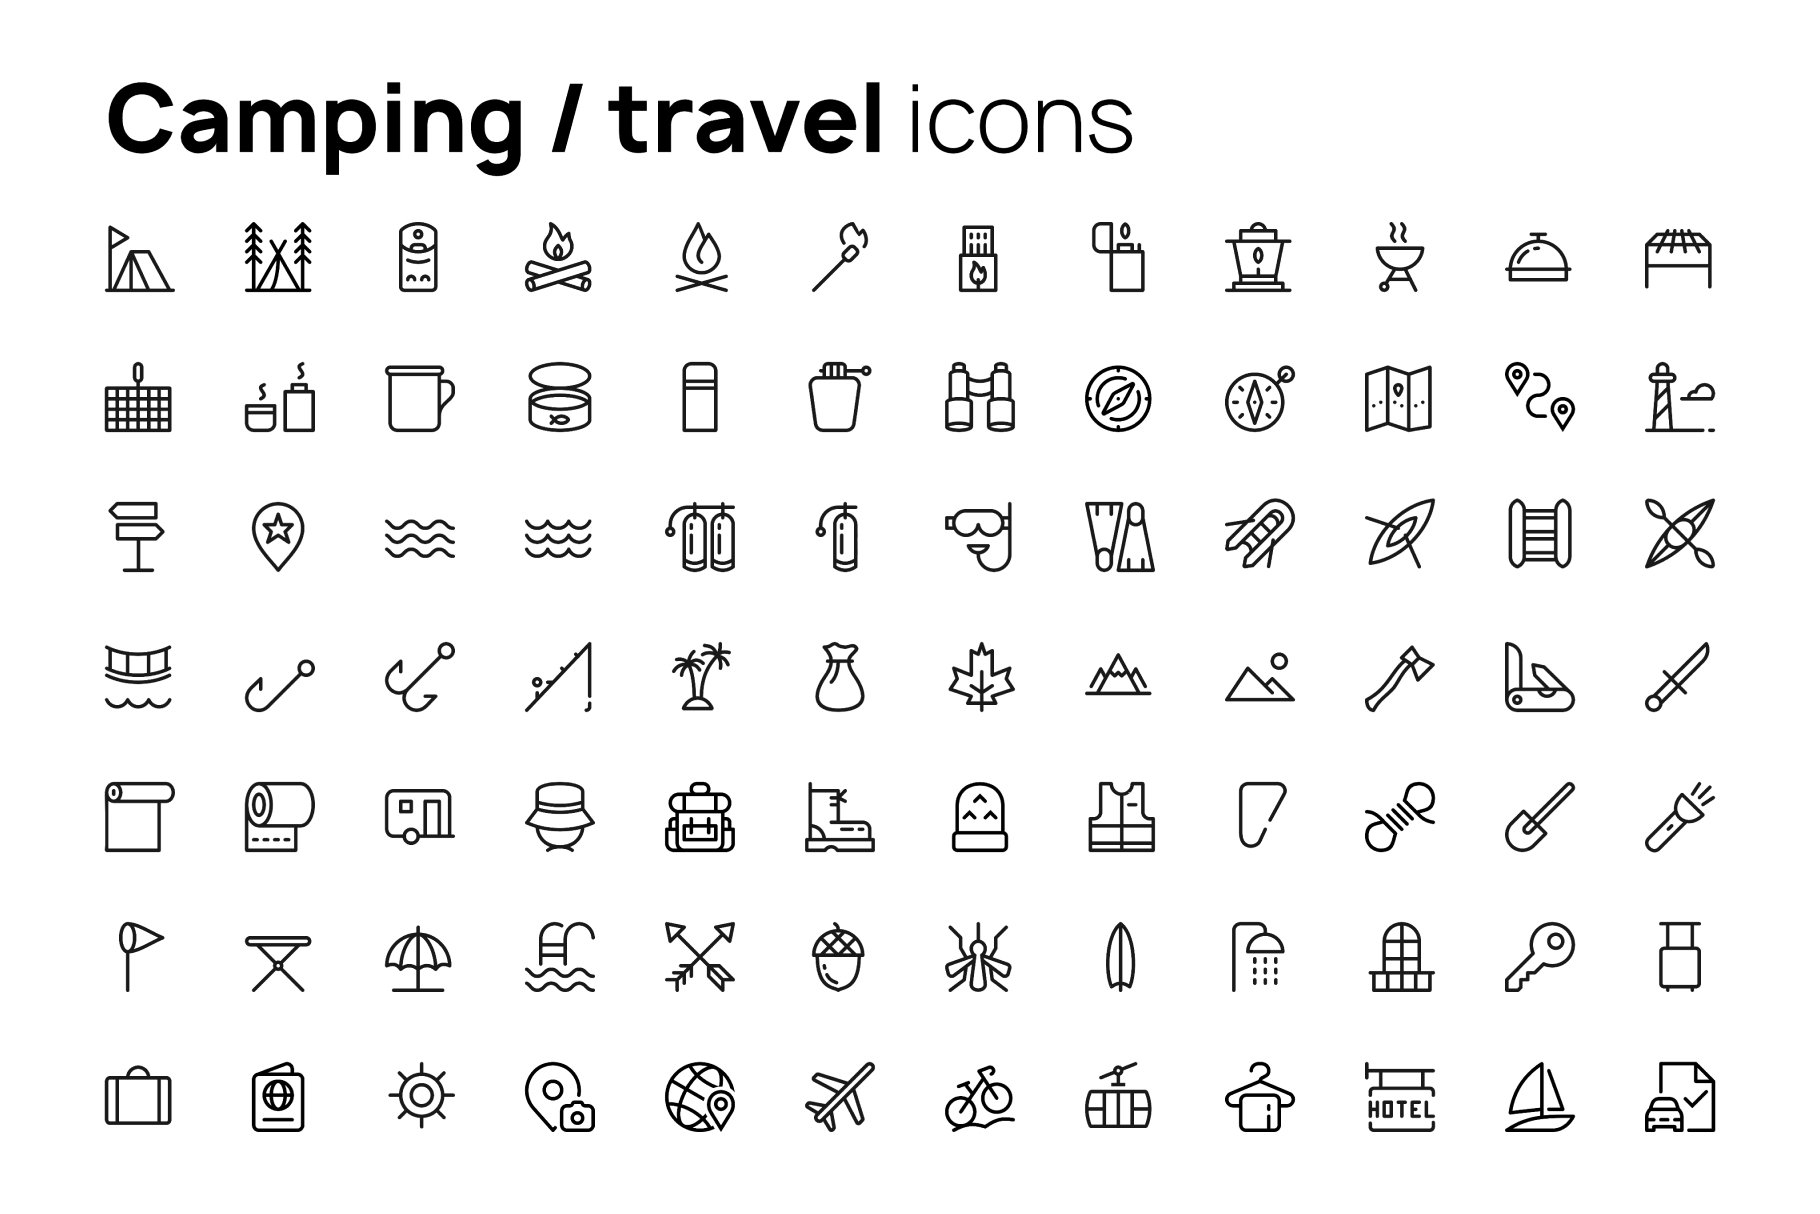 Camping & travel icons preview image.